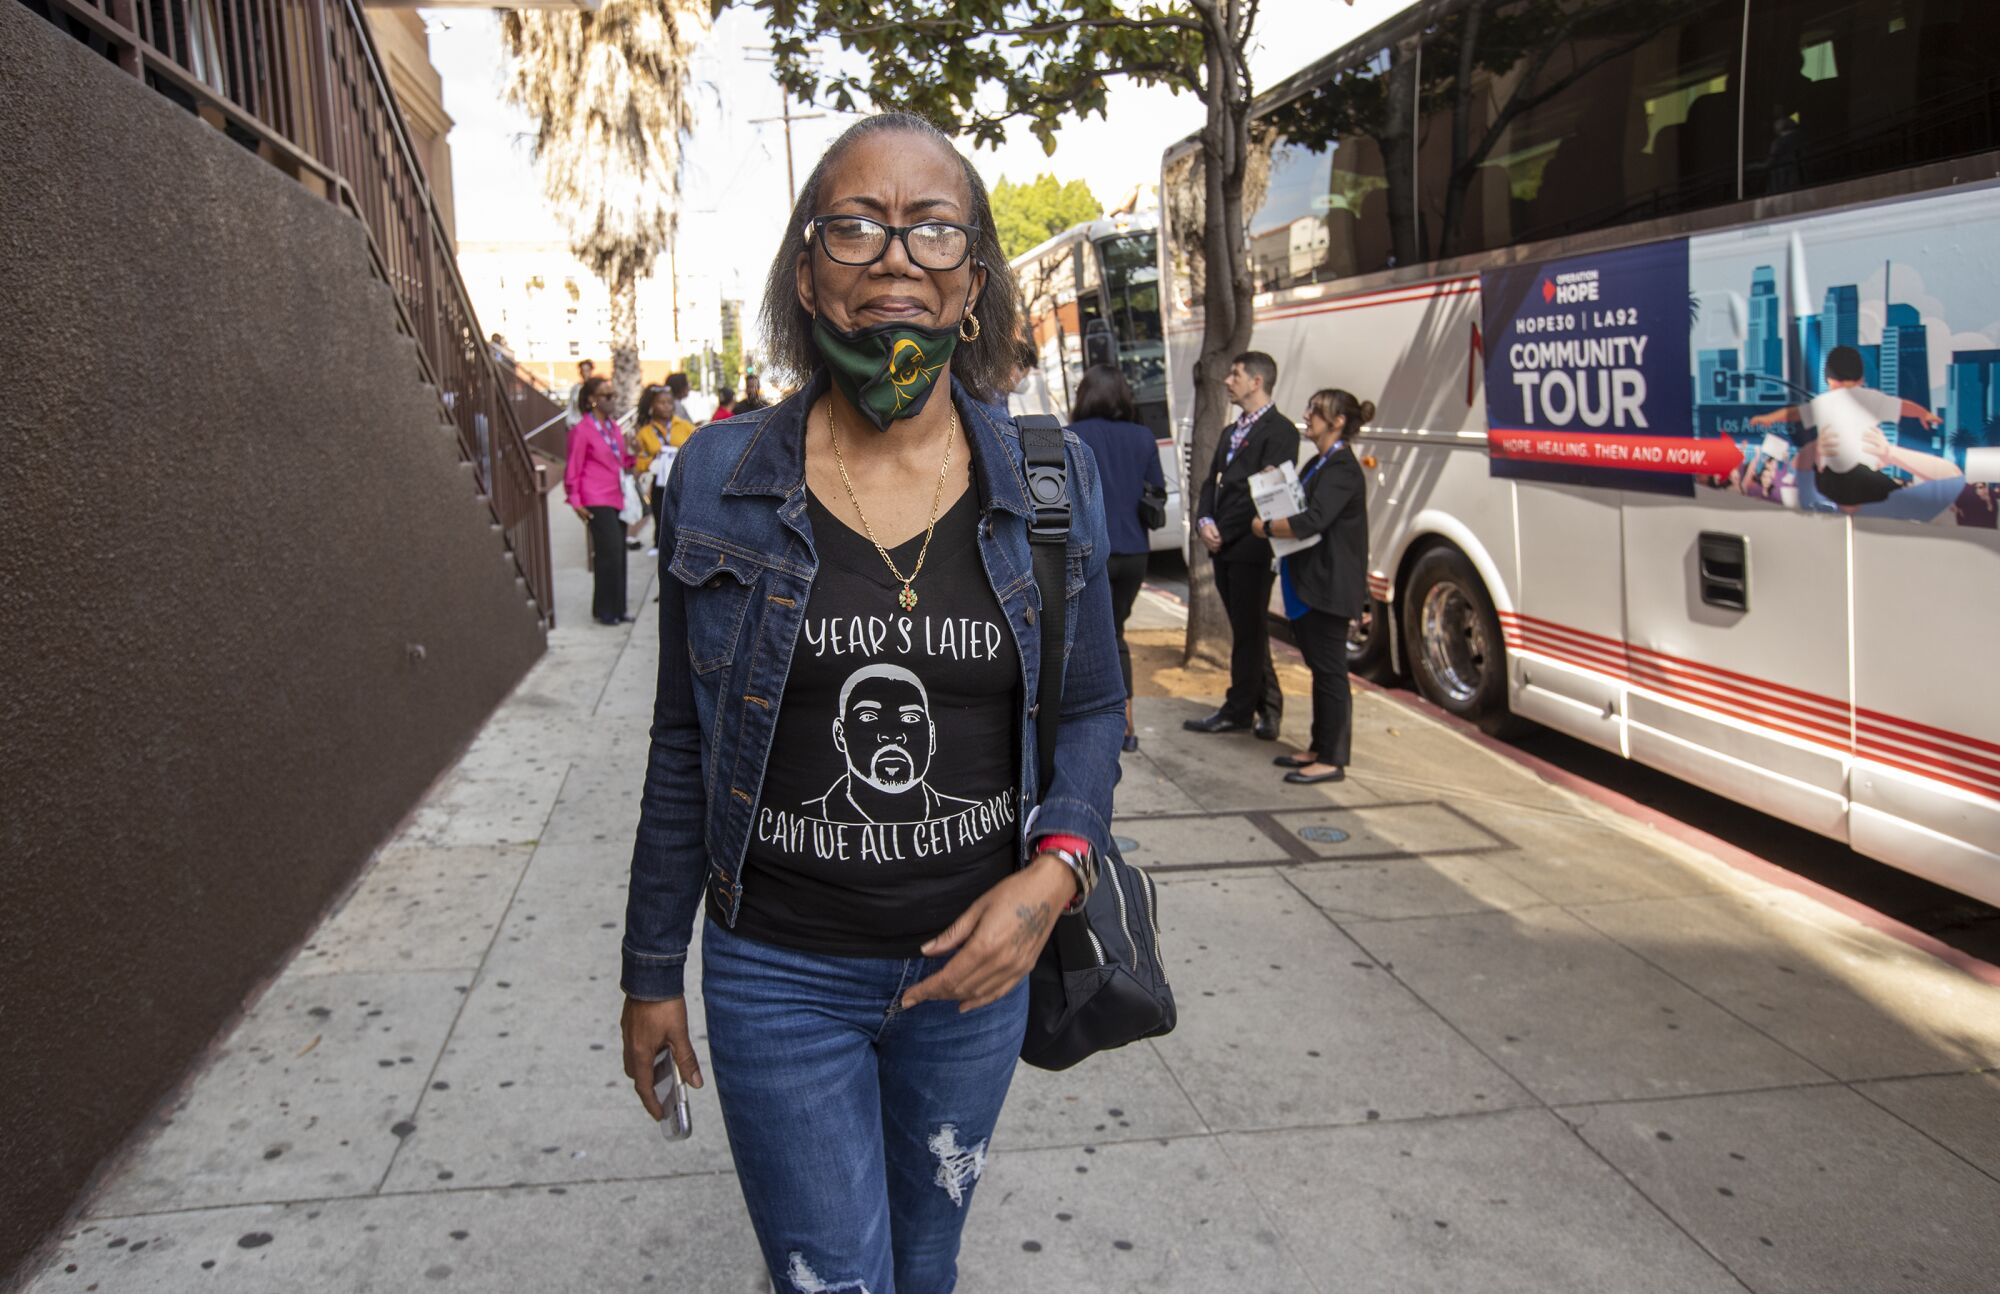 Dennetta King, former wife of the late Rodney King, wears a shirt with an image in his likeness.